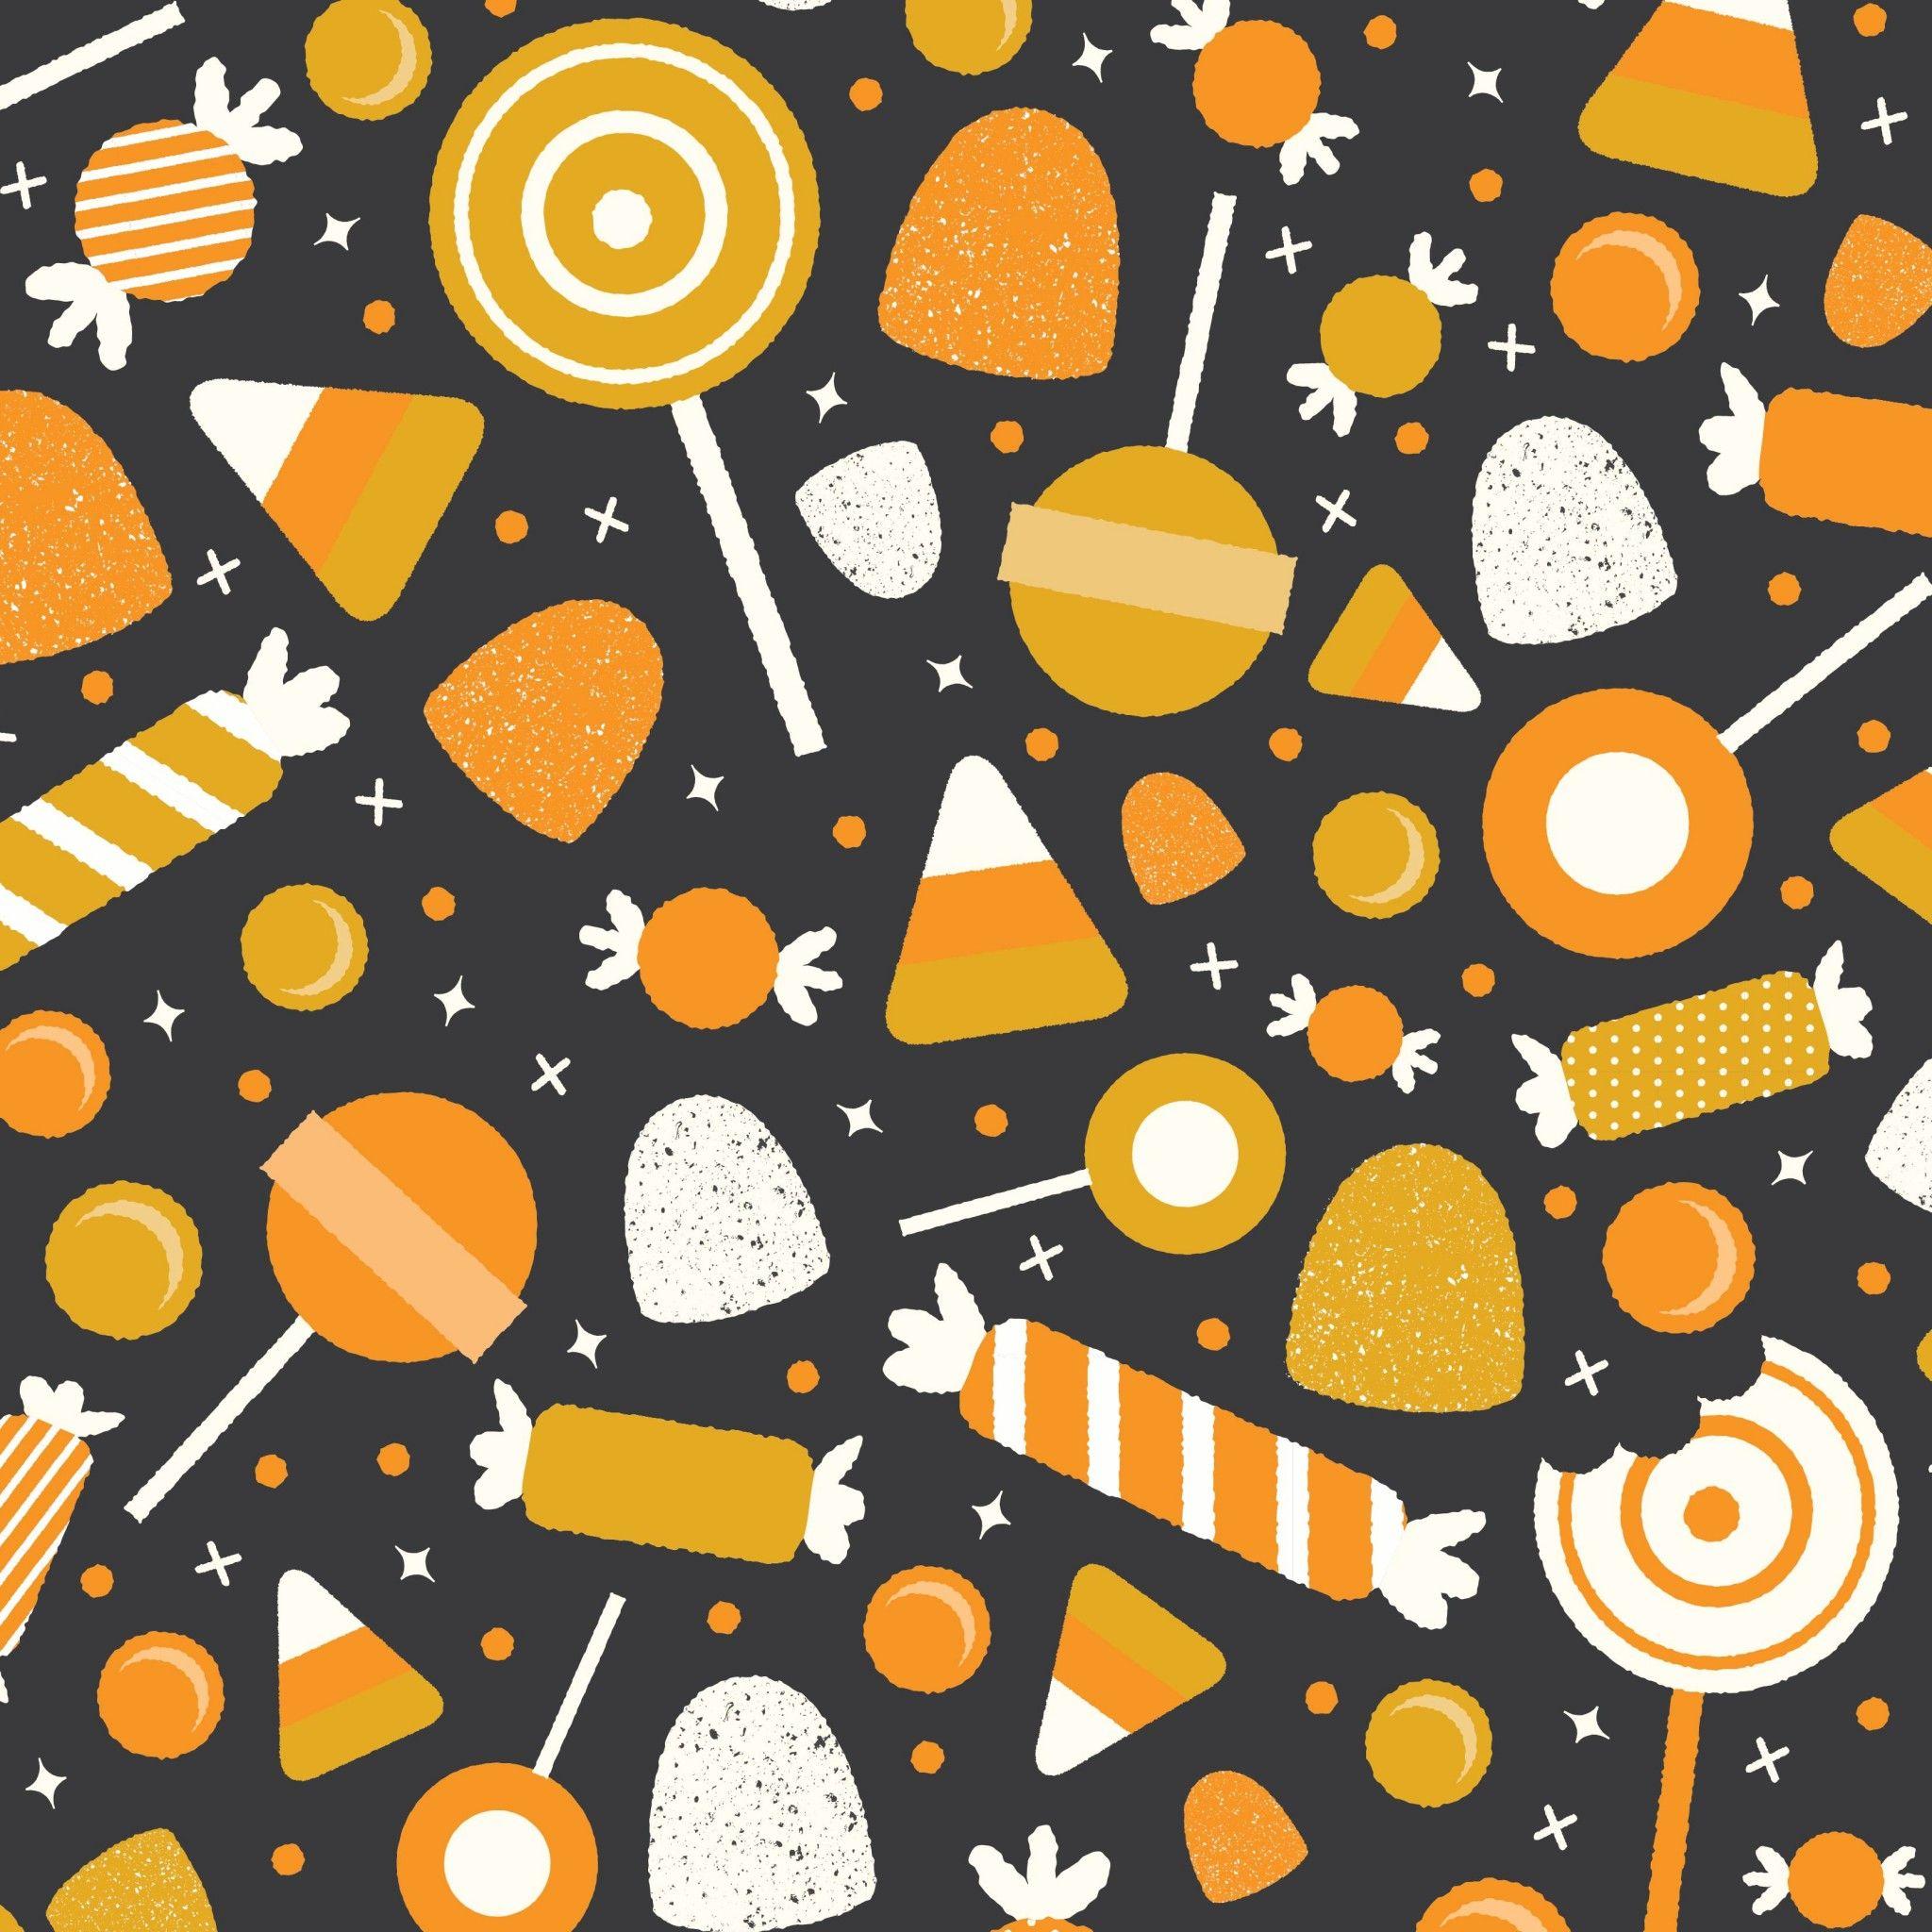 Halloween candy. Tap image for more fun pattern wallpaper for iPhone, iPad & Android! - Halloween desktop wallpaper, Halloween patterns, Halloween wallpaper